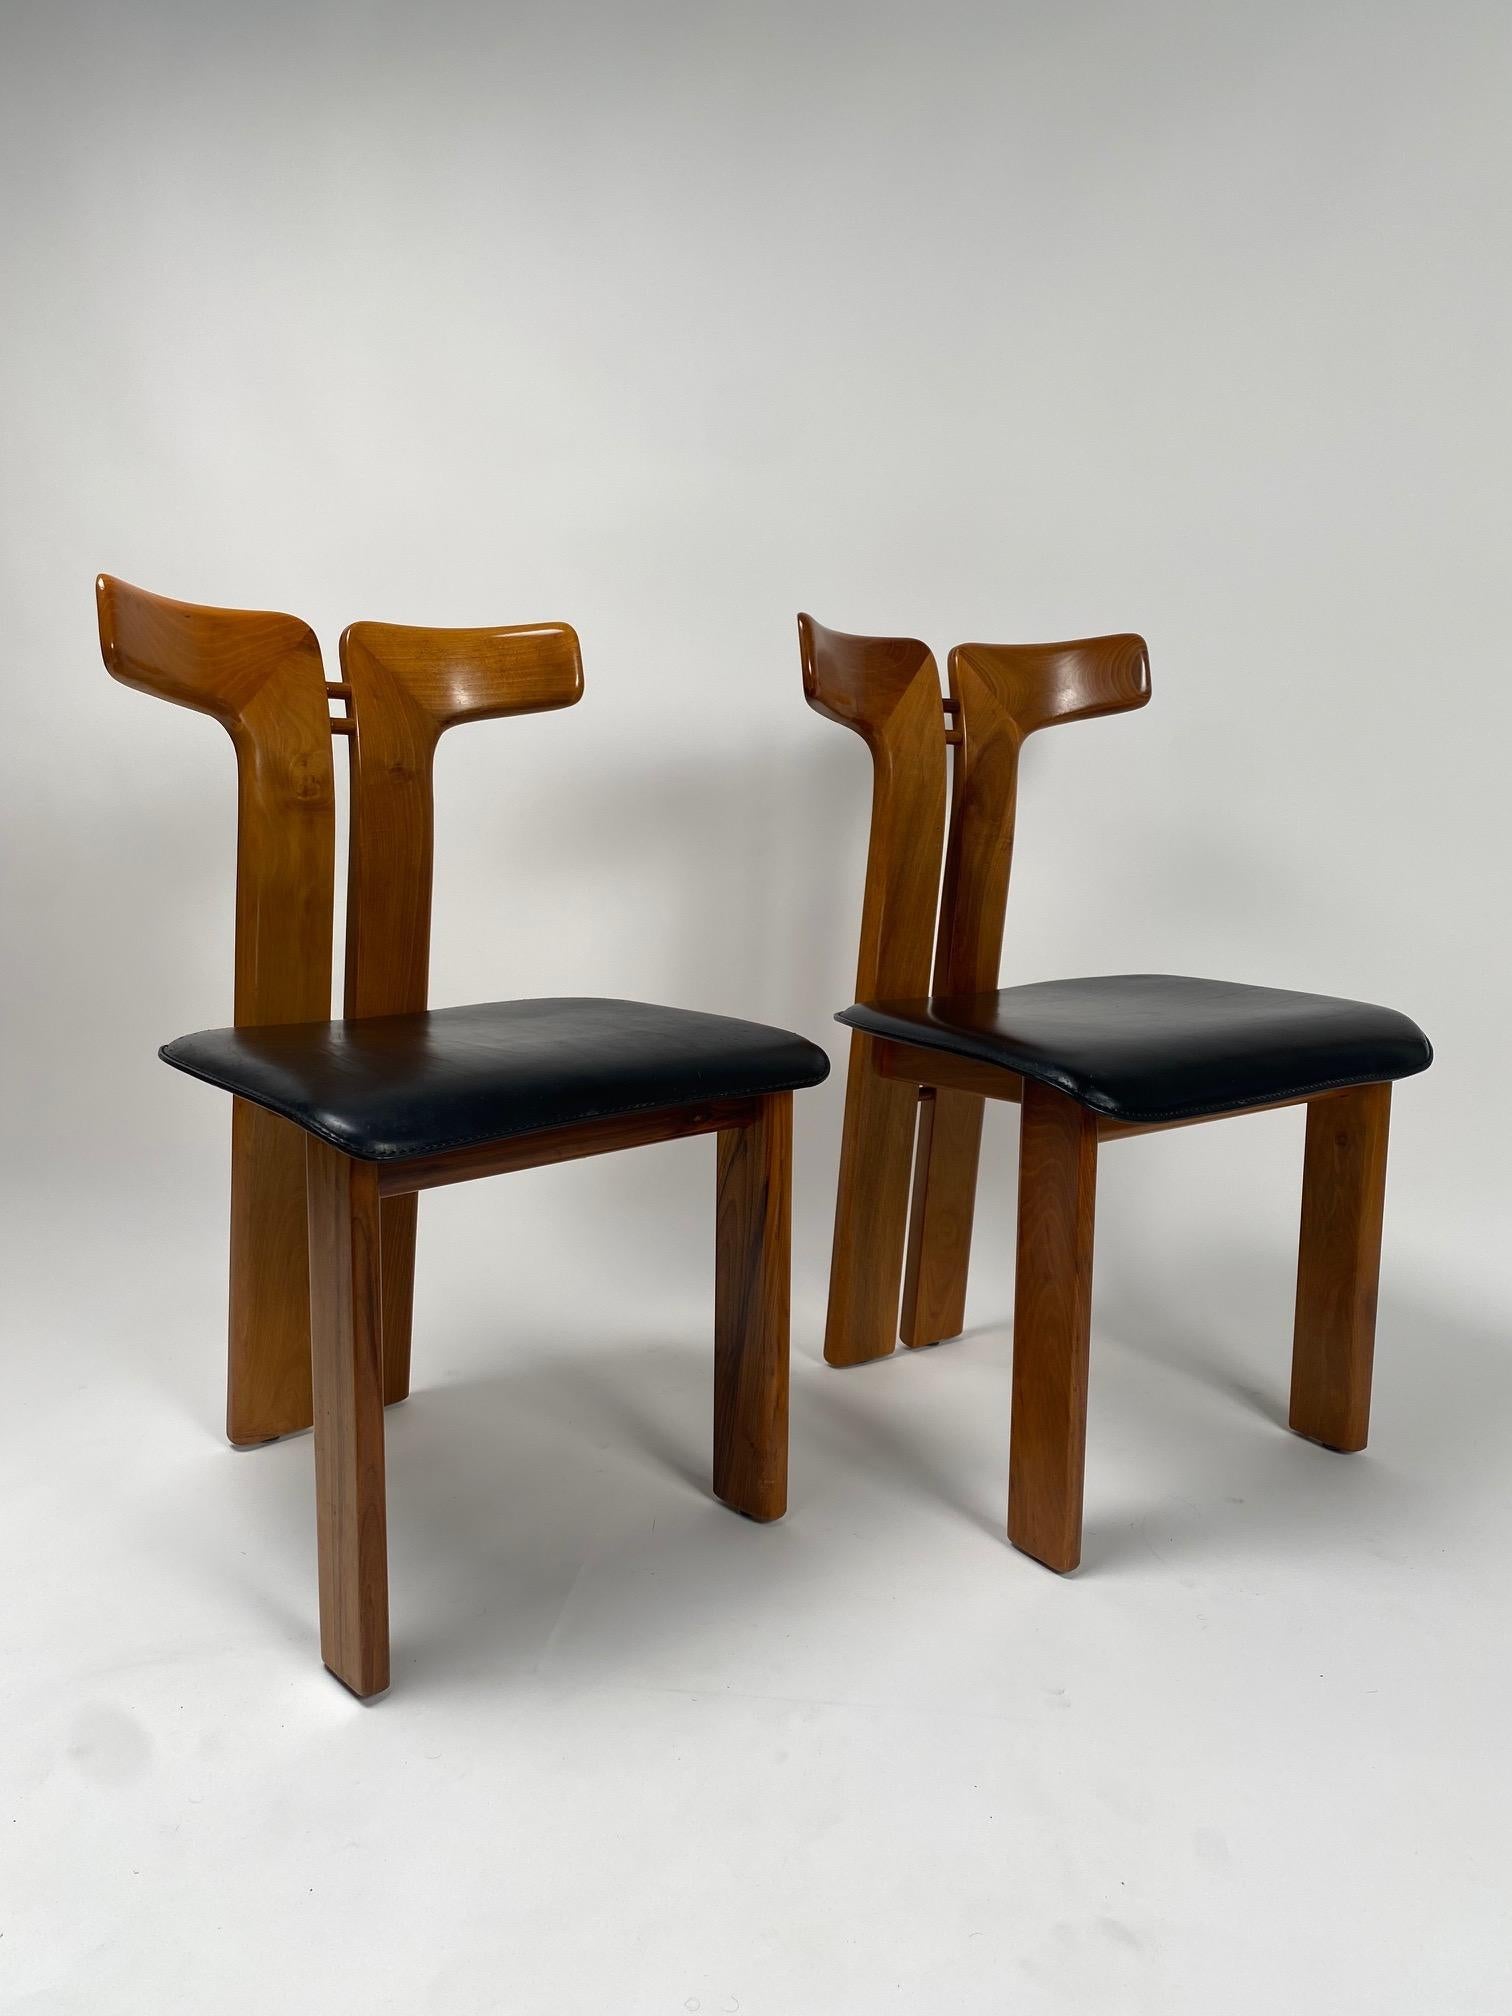 Pierre Cardin, 6 Dining Chairs in Walnut and Leather, 1970s In Good Condition For Sale In Argelato, BO